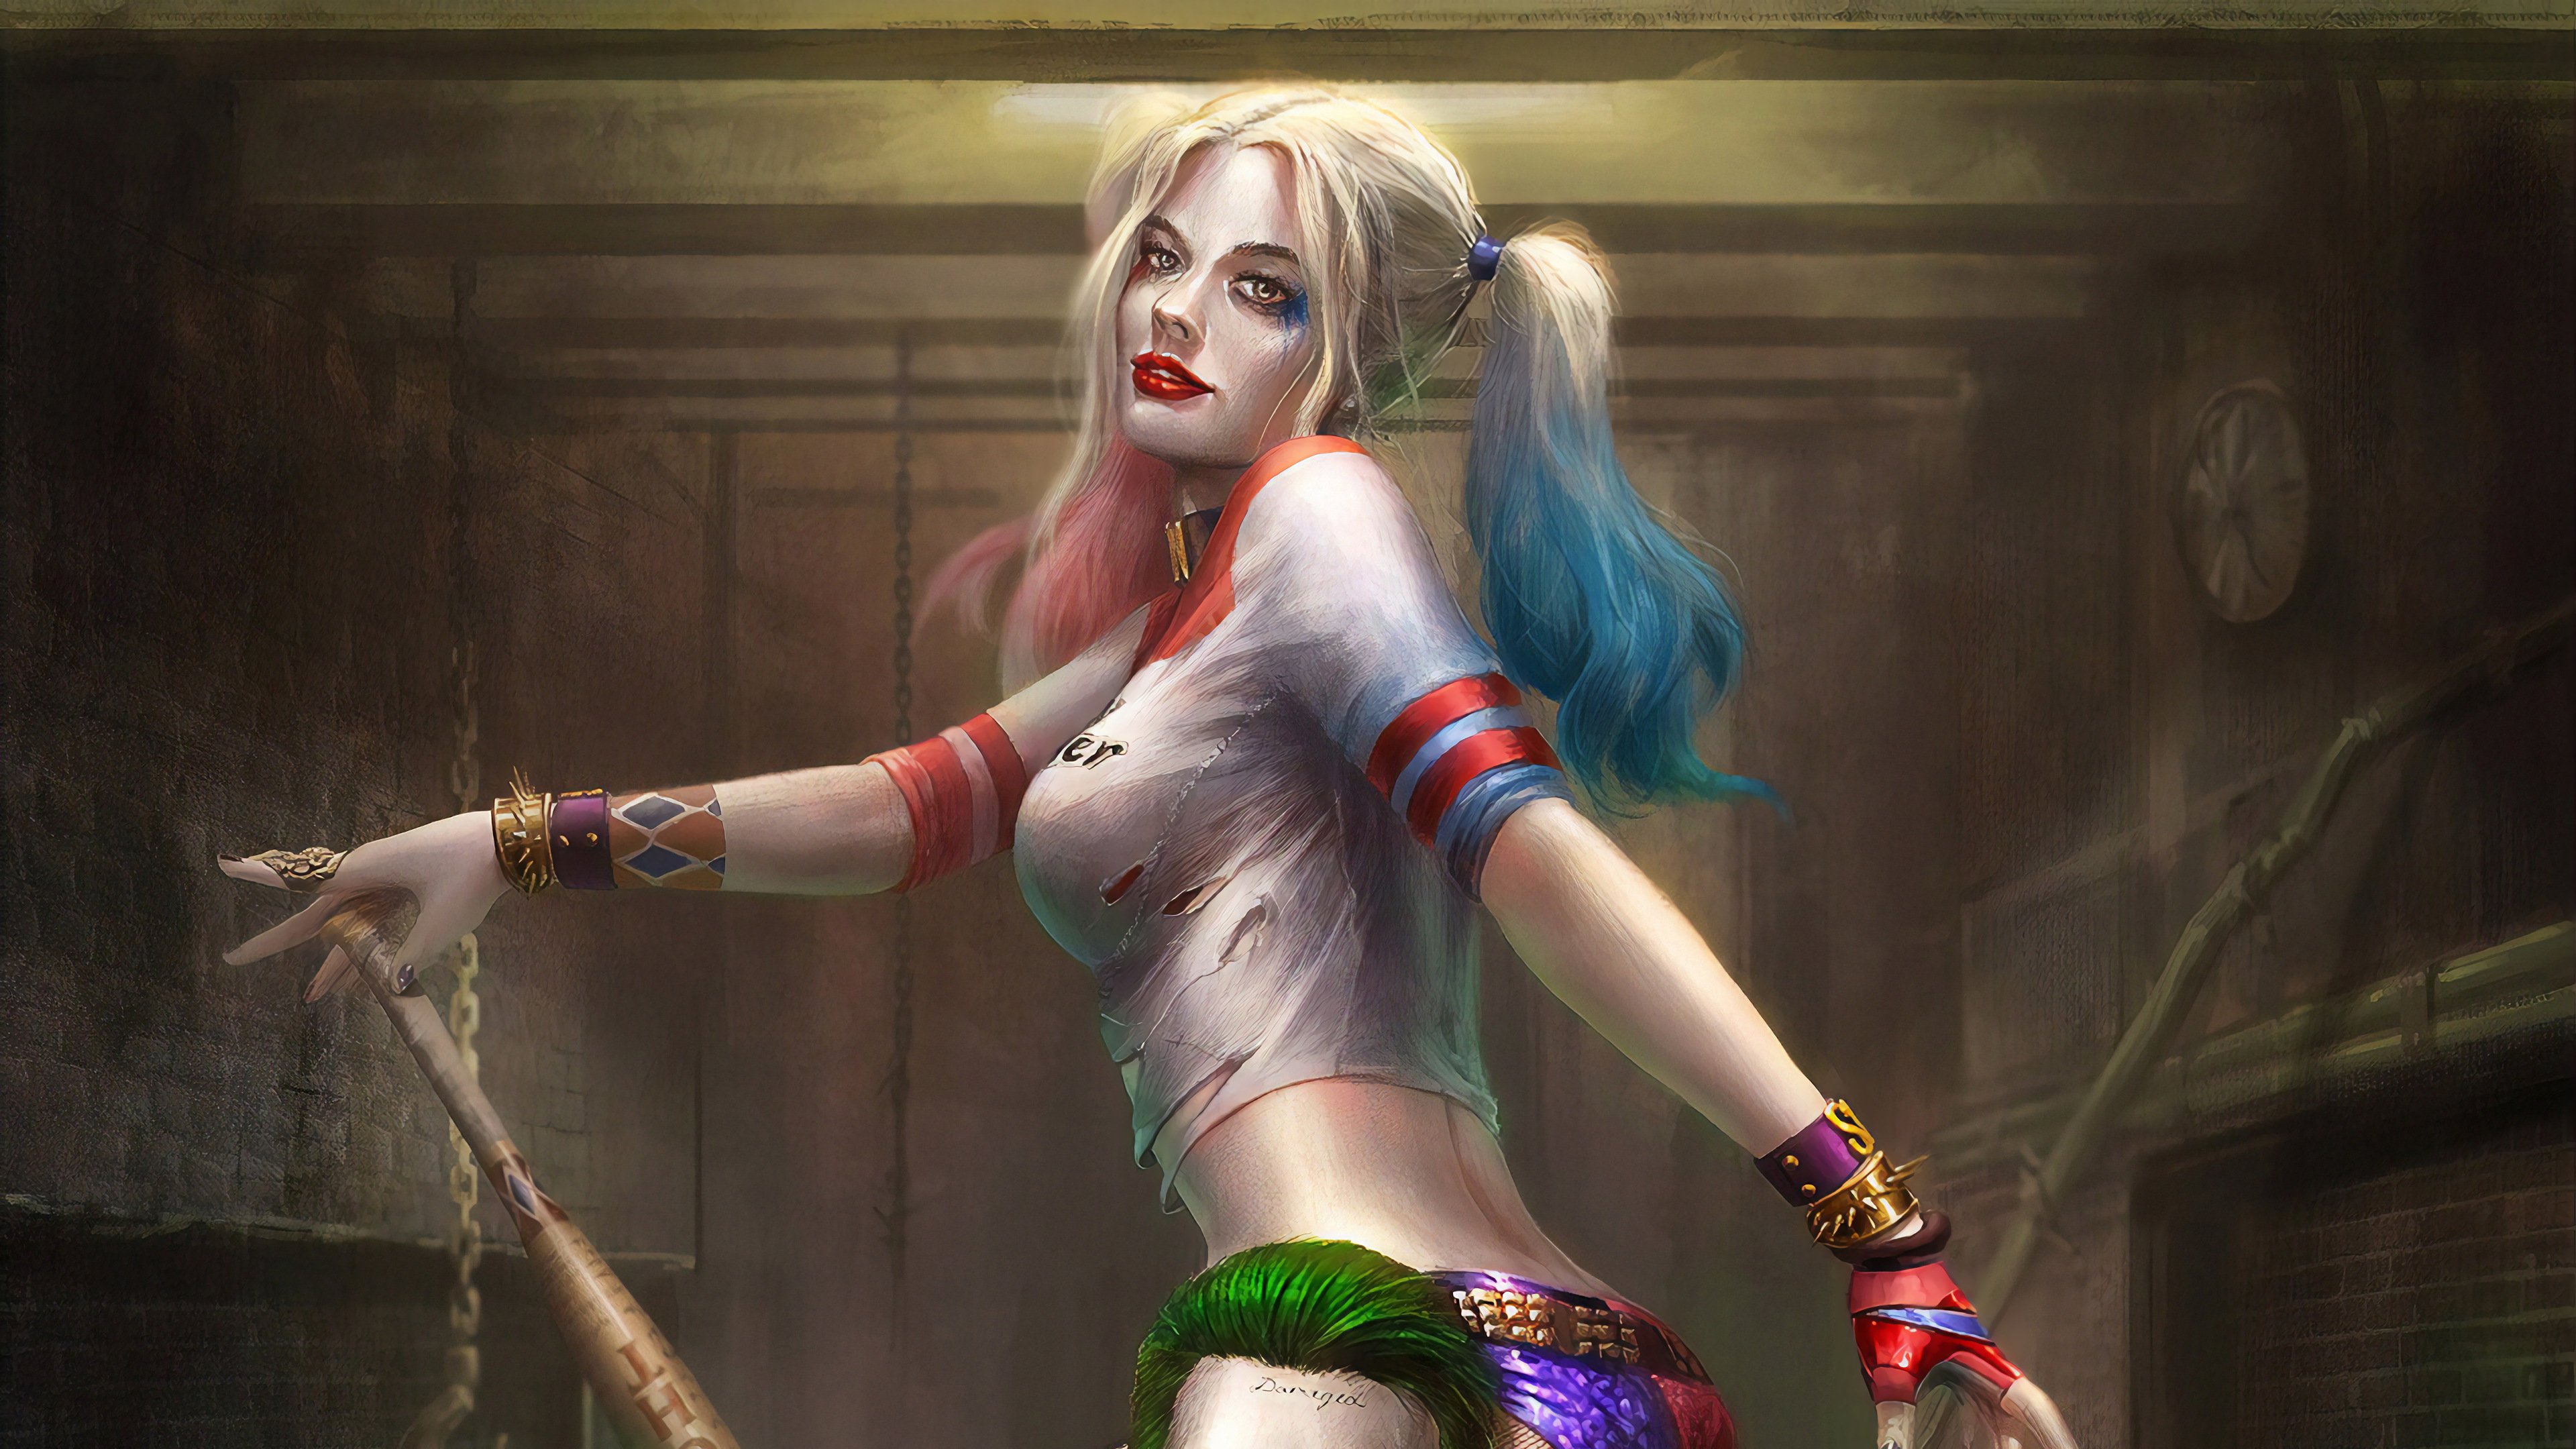 Wallpaper Painting from Harley Quinn